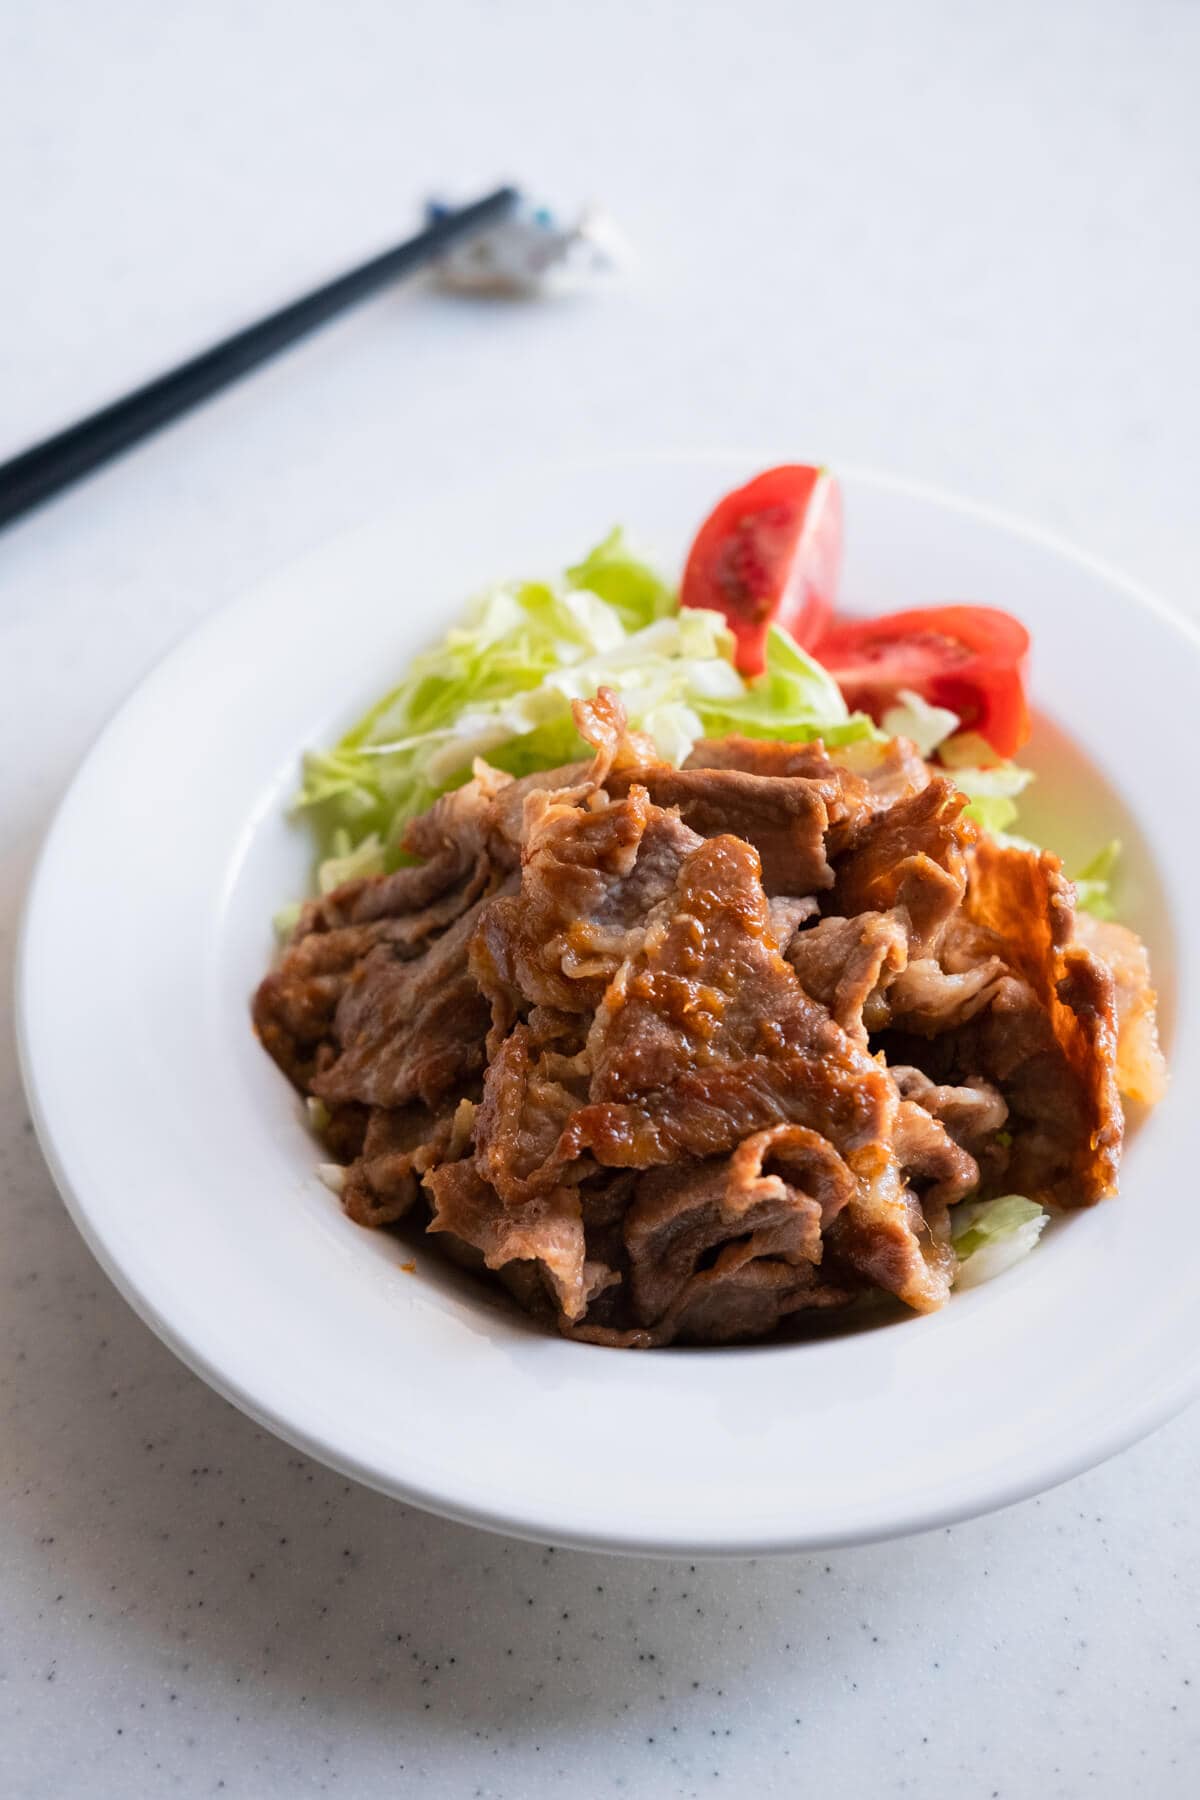 Tender pork slices coated with sweet ginger sauce served with shredded lettuce and sliced tomatoes in a plate with a pair of chopstick on the side.